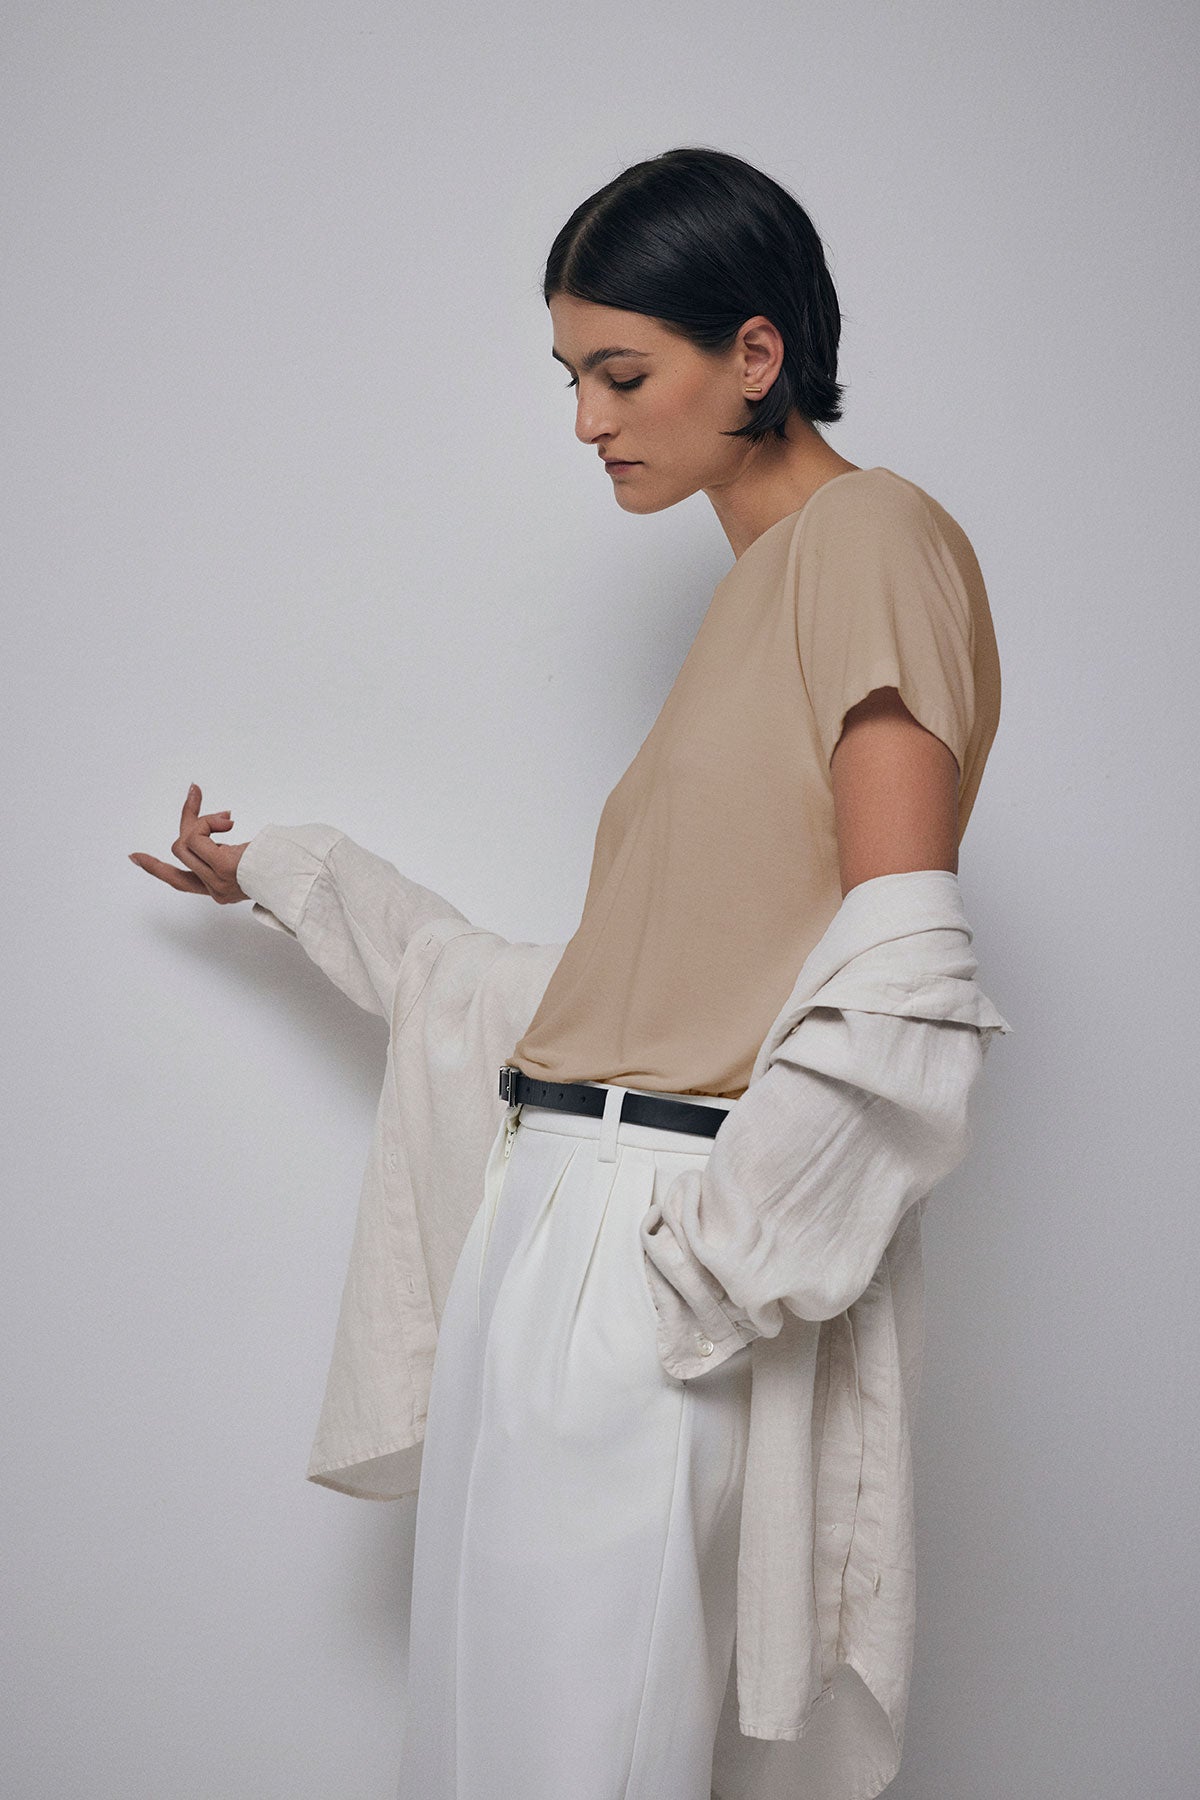 A person wearing a neutral-toned outfit with a Velvet by Jenny Graham SOLANA TEE draped over their arms, standing against a plain background and looking down at their hand.-36290913829057